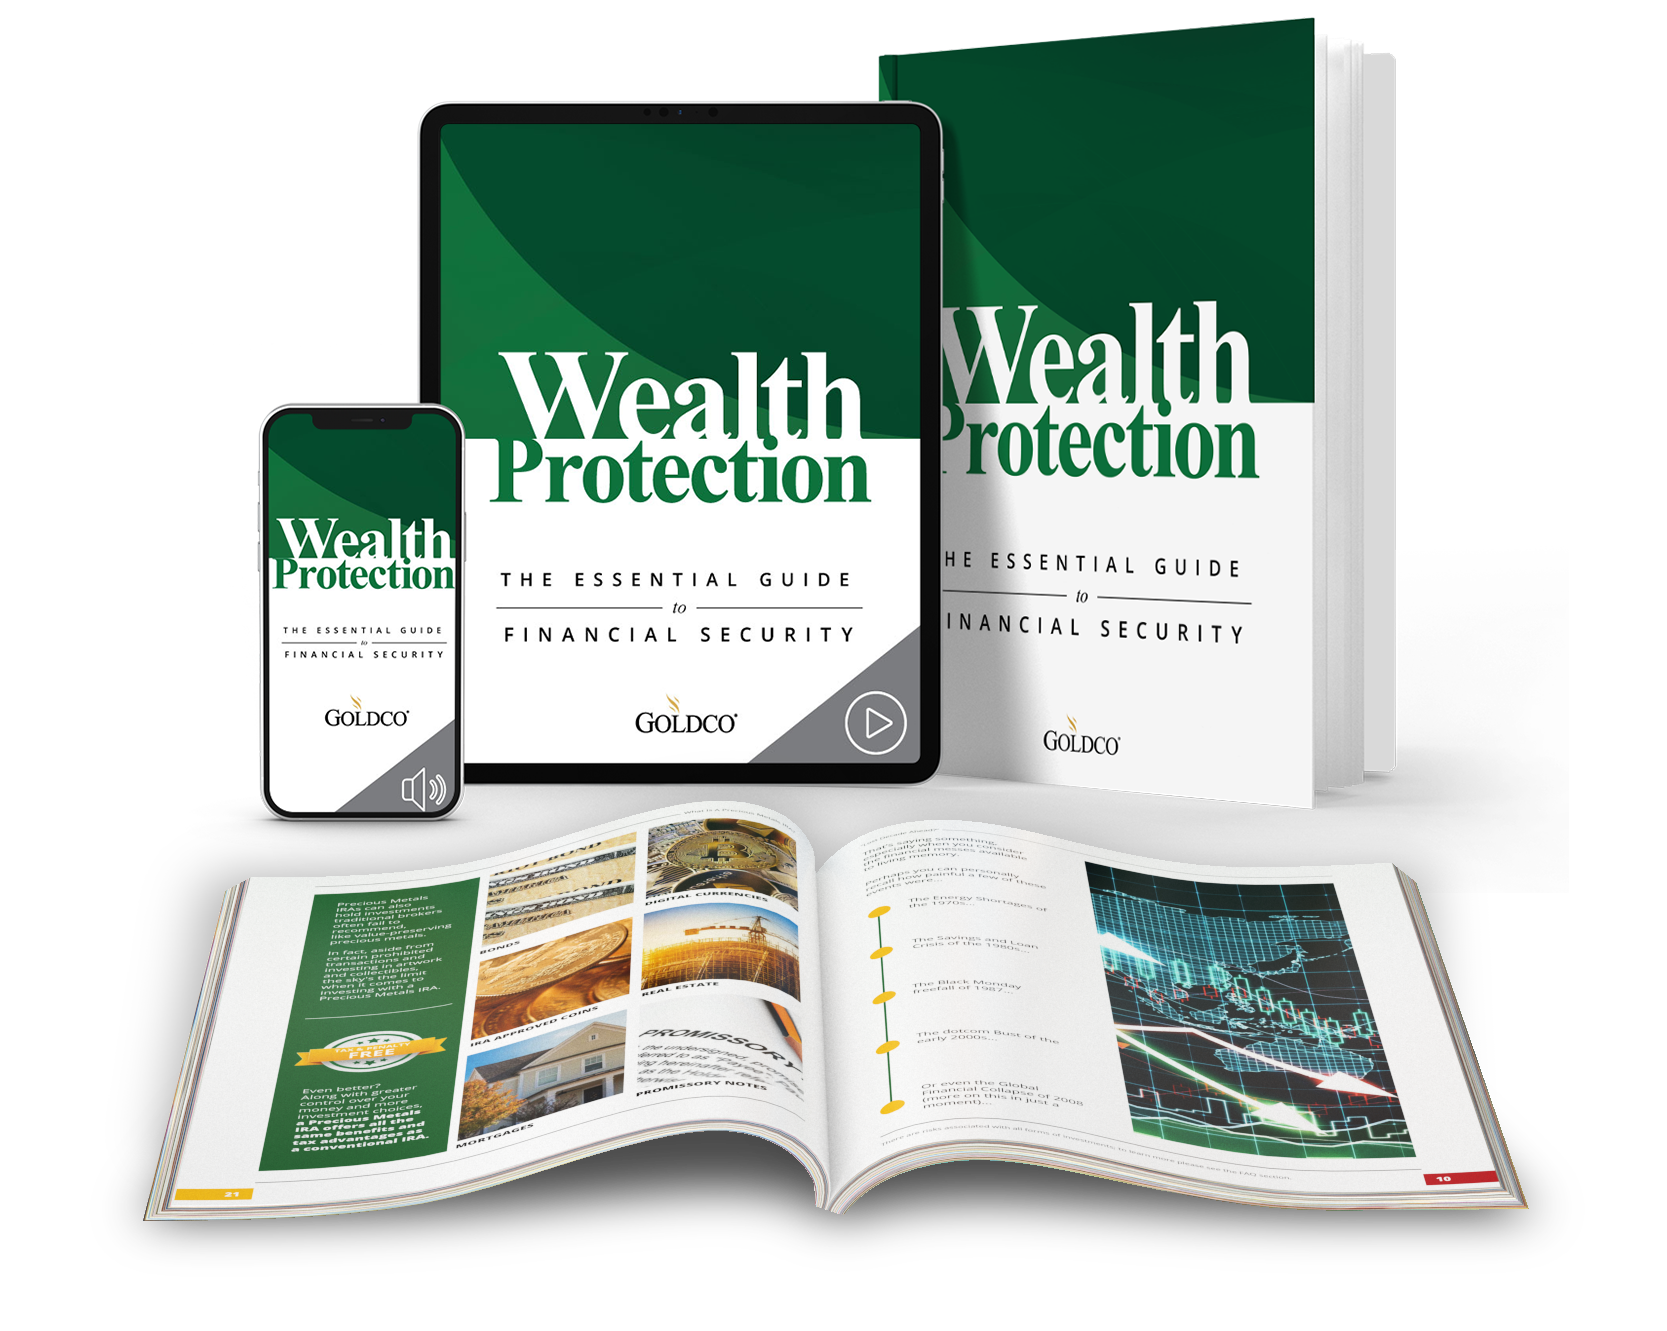 booklet of information on wealth protection